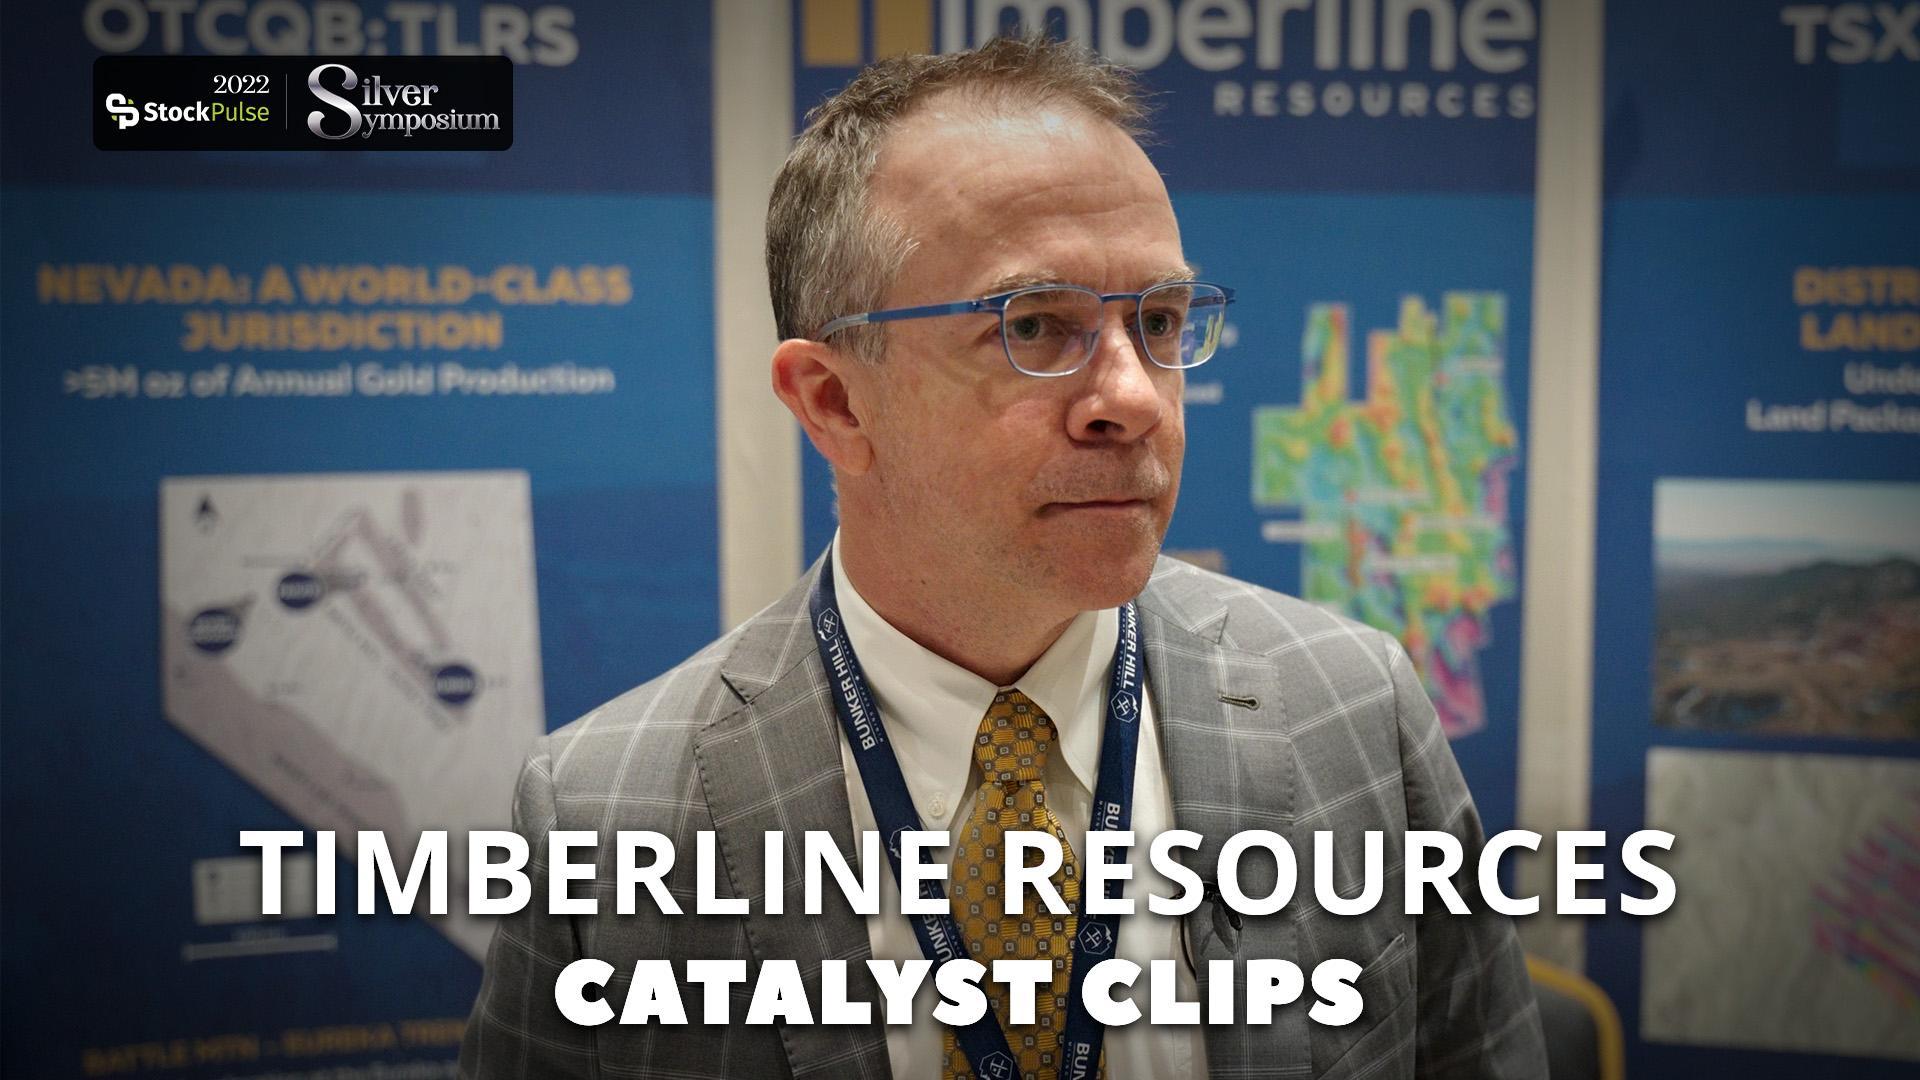 Catalyst Clips | Patrick Highsmith of Timberline Resources